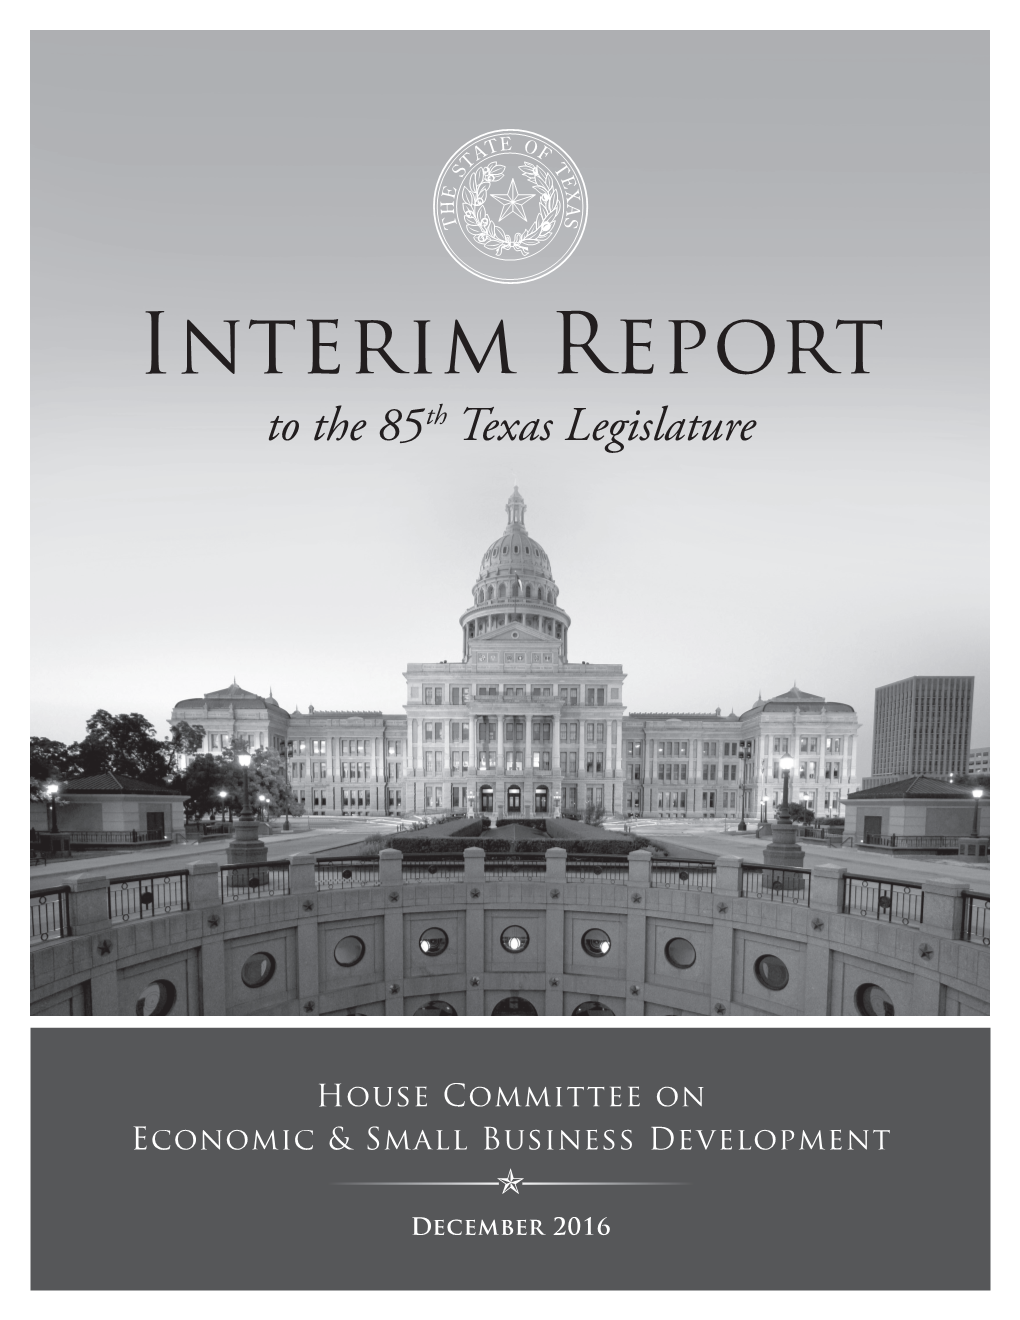 House Committee on Economic & Small Business Development